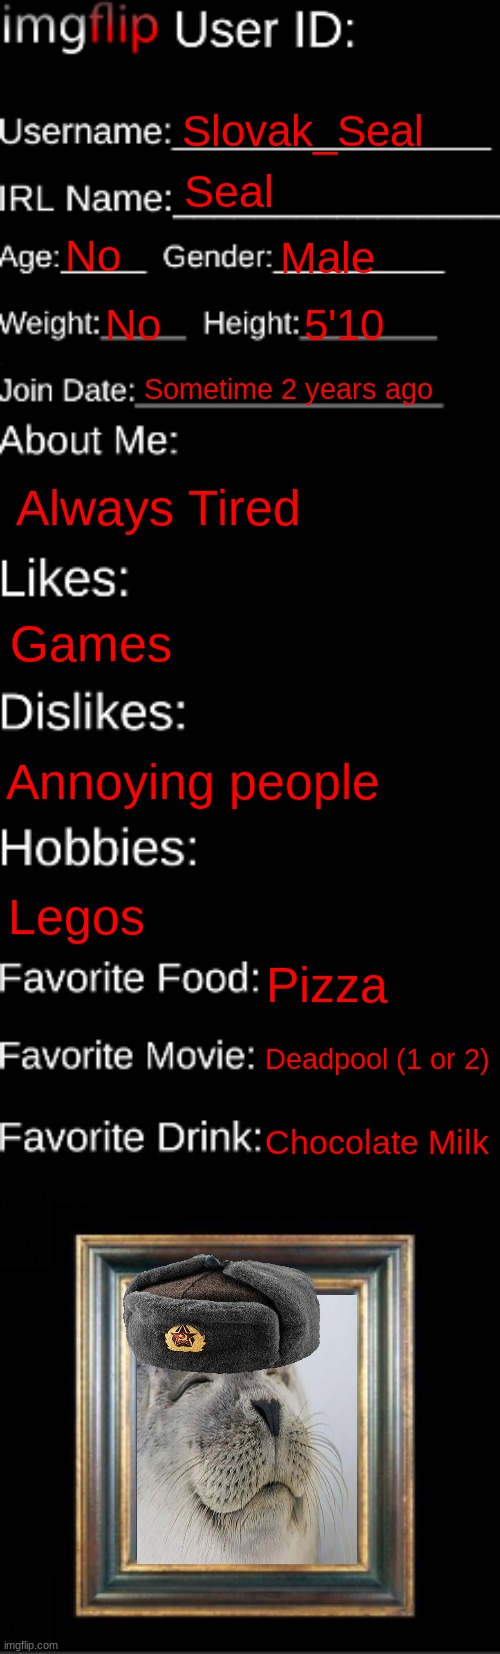 I was just bored | Slovak_Seal; Seal; No; Male; No; 5'10; Sometime 2 years ago; Always Tired; Games; Annoying people; Legos; Pizza; Deadpool (1 or 2); Chocolate Milk | image tagged in imgflip id card,seal | made w/ Imgflip meme maker